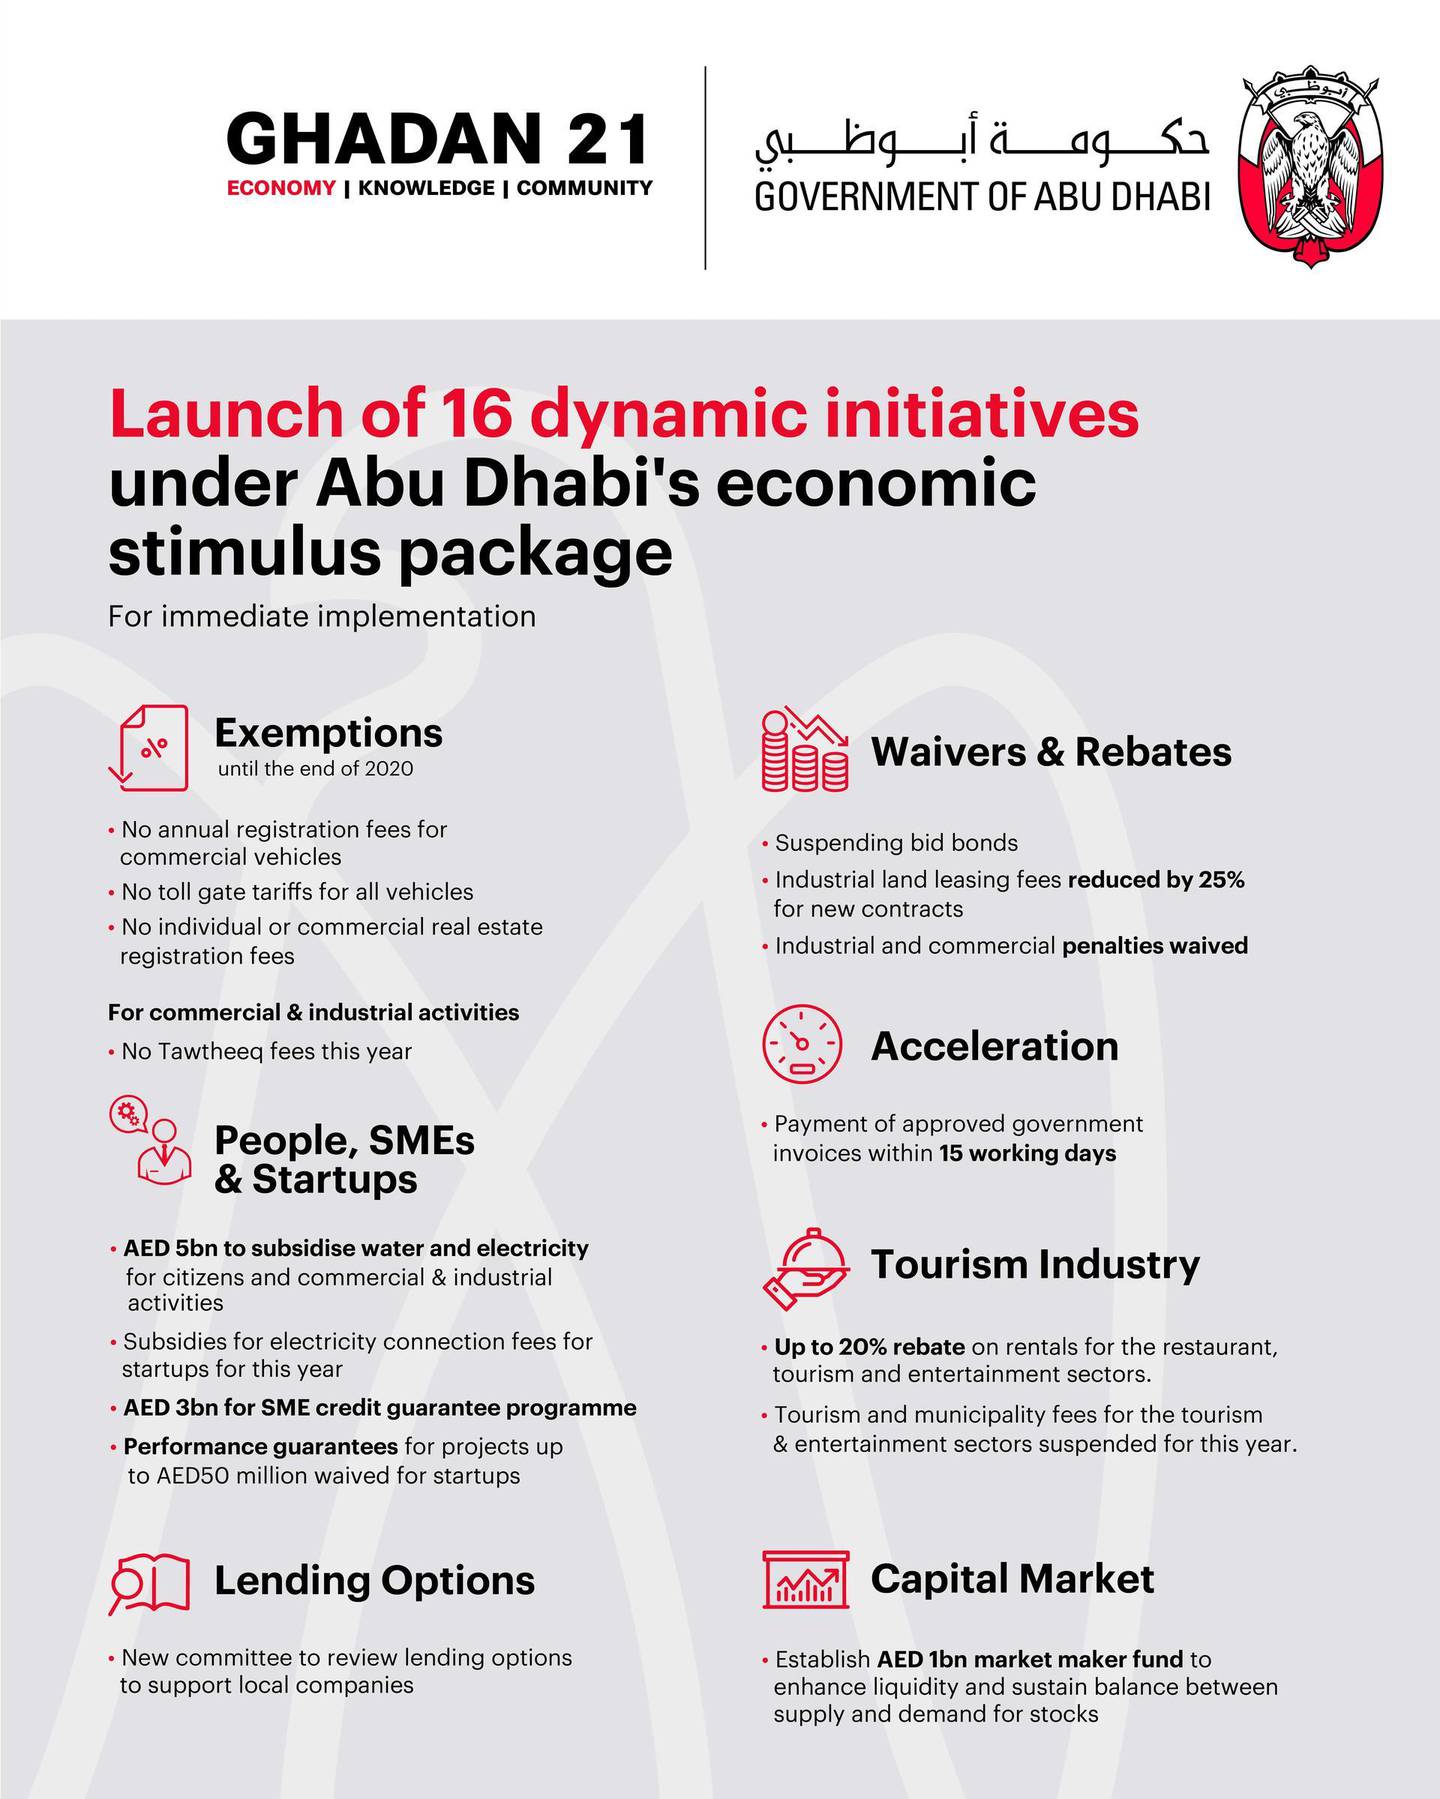 Graphic courtesy Abu Dhabi Government Media Office.